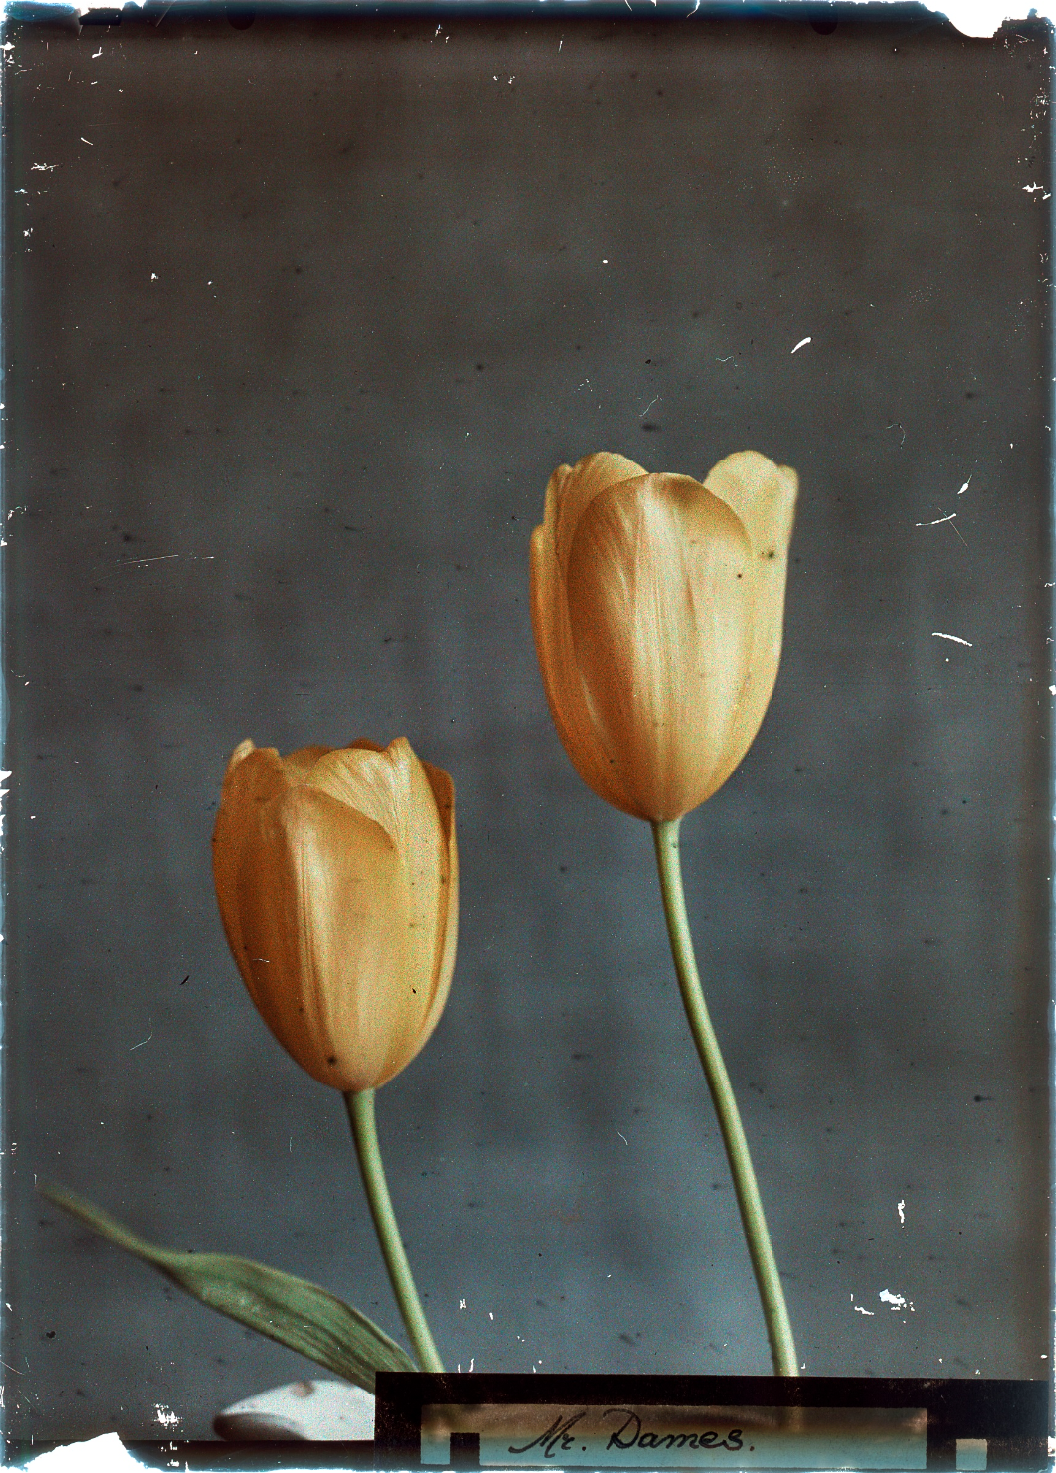 Leendert Blok :: Tulips, Mr. Dames, Lisse, The Netherlands, ca. 1927. Autochrome. Early colour photography. | src Nationaal Archief ~ Collectie Spaarnestad